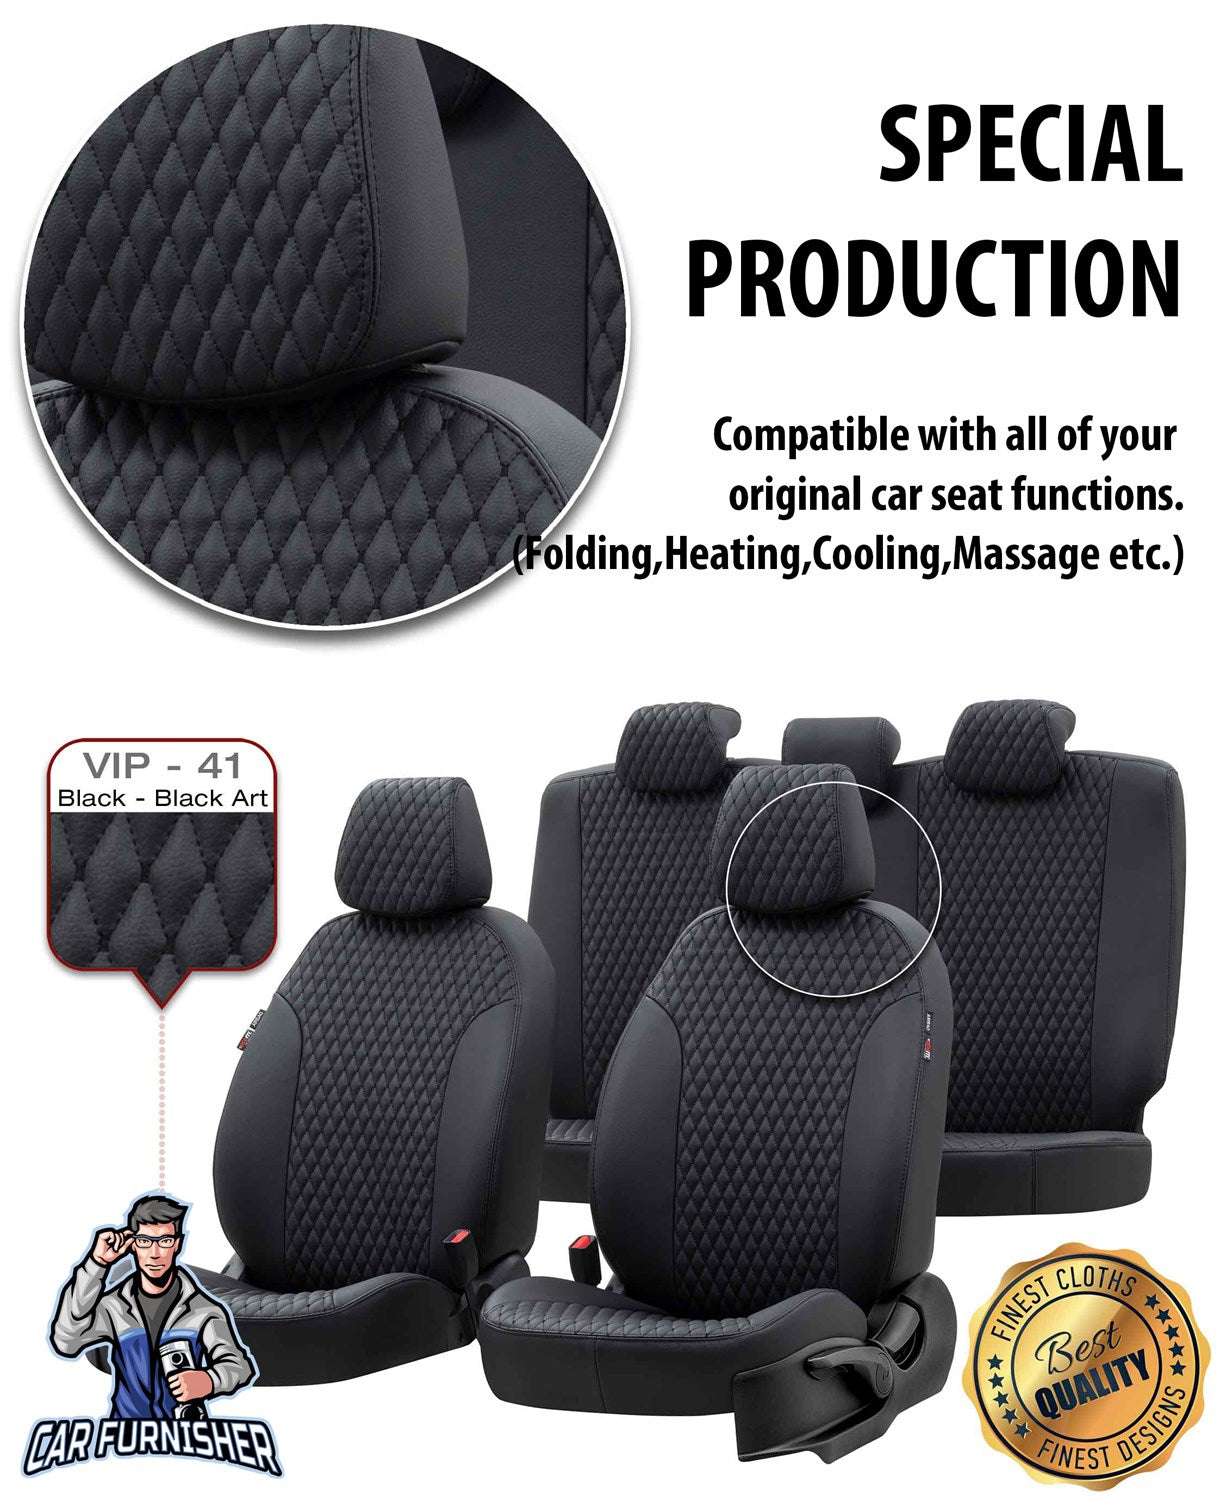 Mitsubishi Colt Seat Covers Amsterdam Leather Design Smoked Black Leather